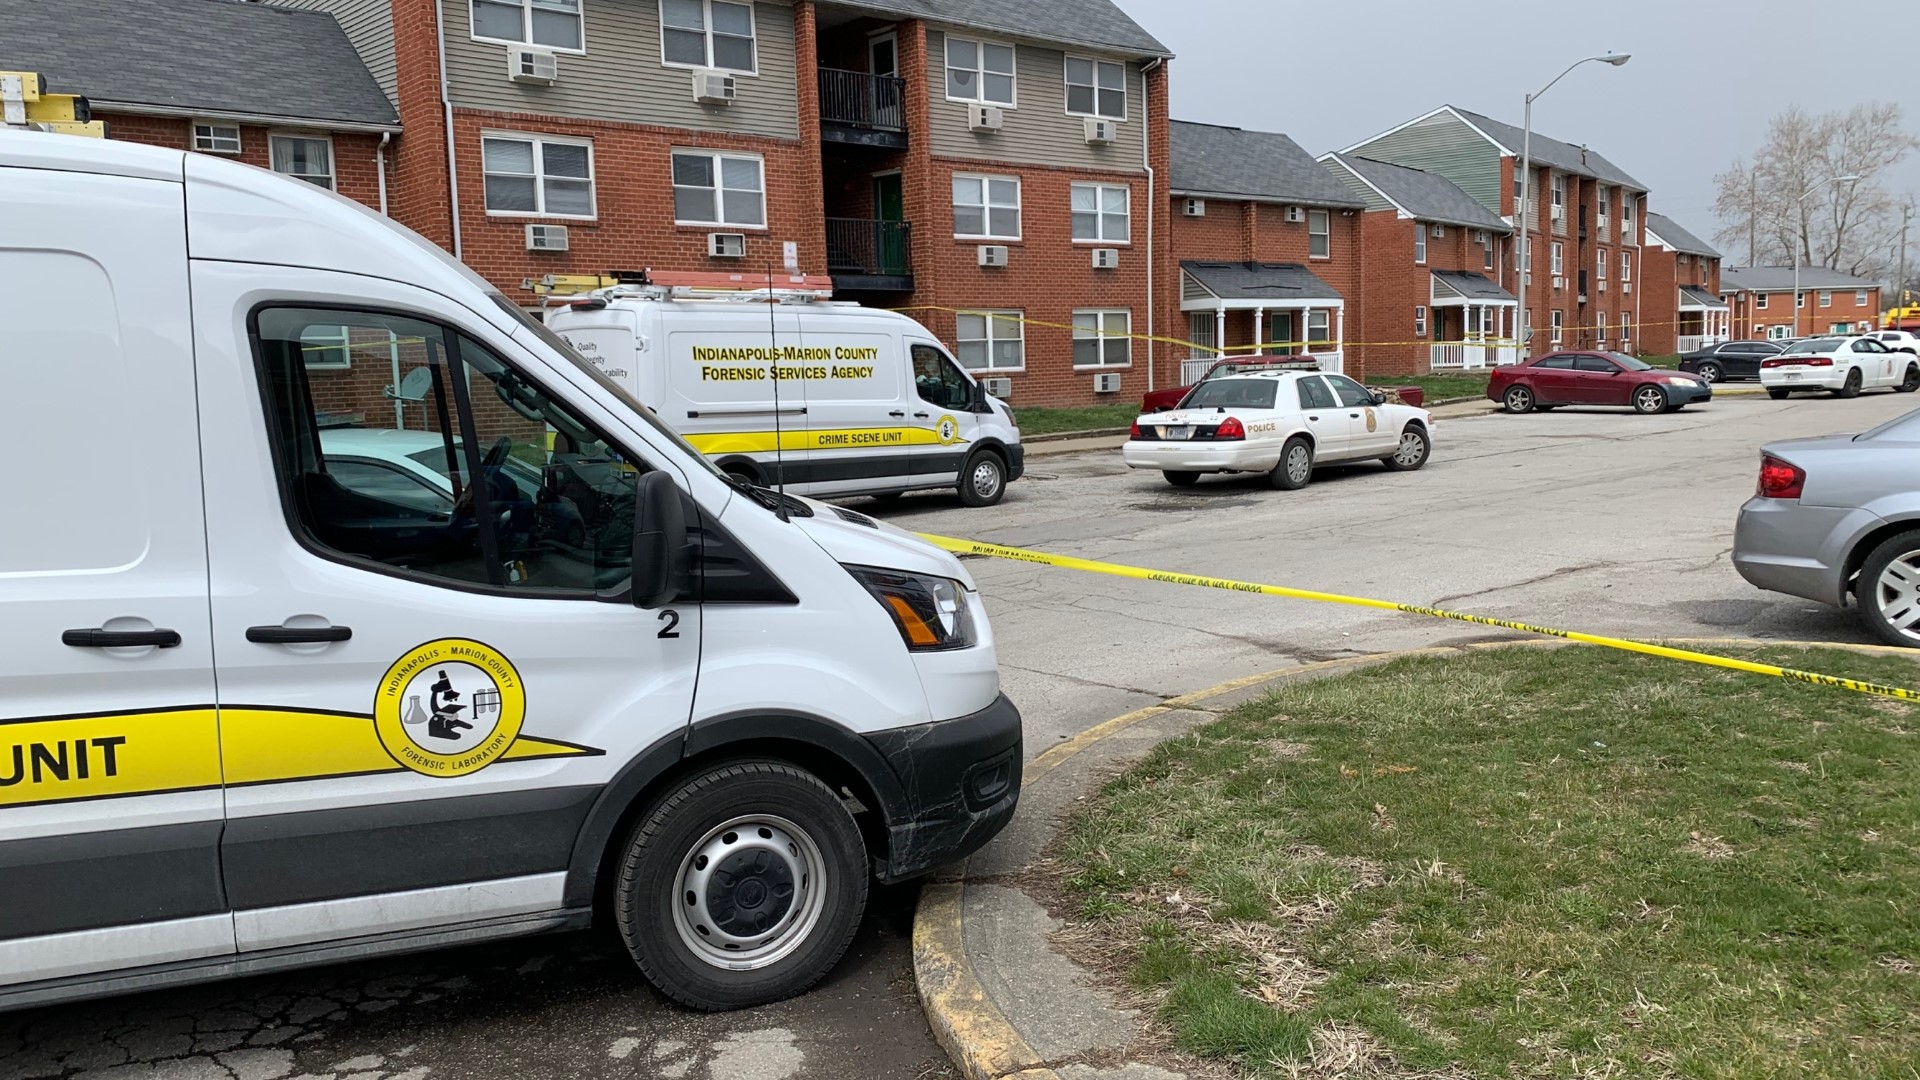 Officers were called to an apartment complex on Beckwith Drive, near East 25th Street and Hillside Avenue, shortly after 1 p.m.